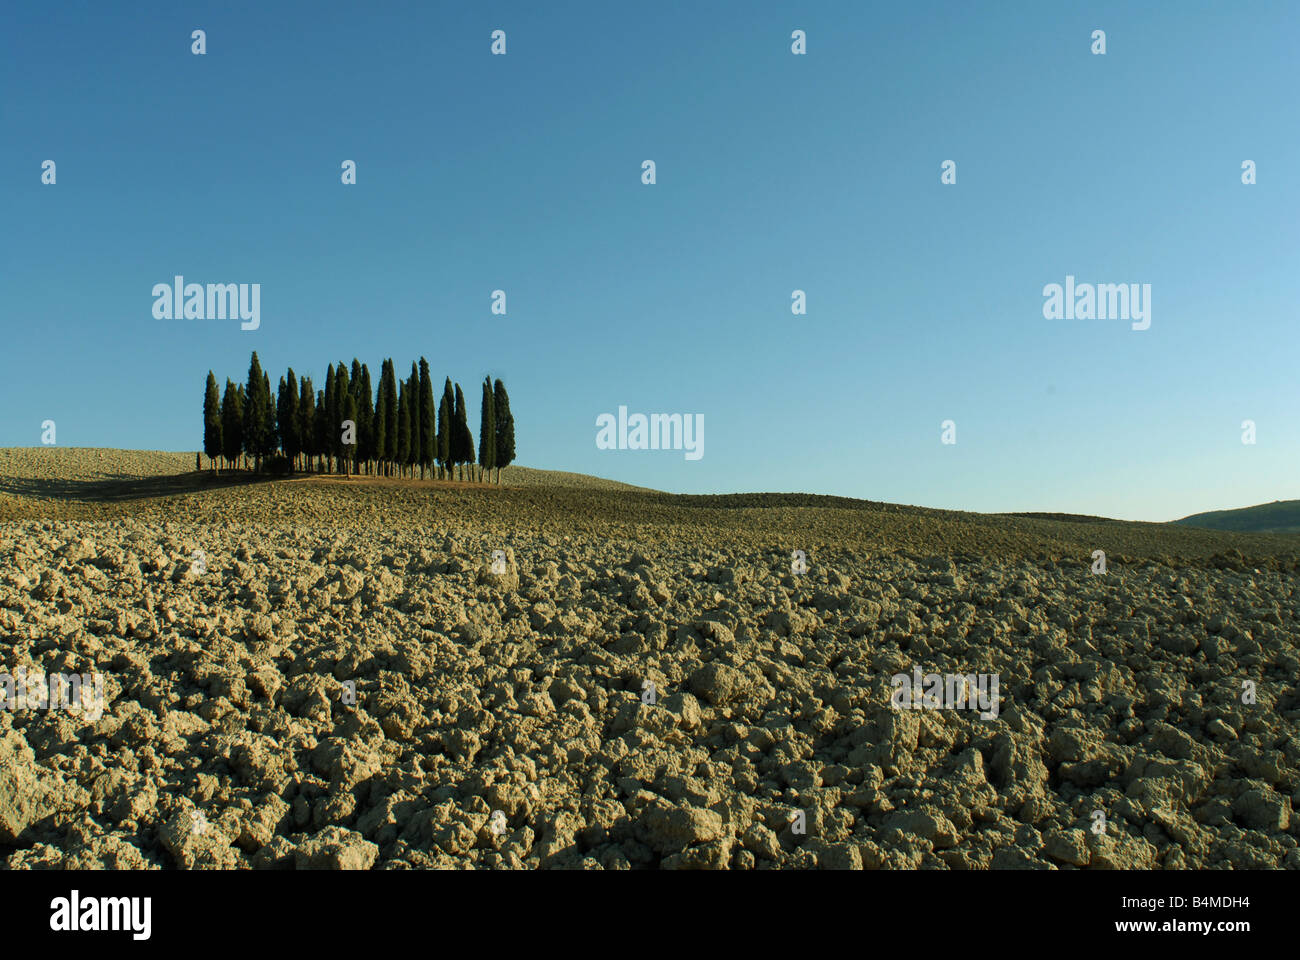 Famous group of Cypress Trees near the town of San Quirico d'orcia, Tuscany, Italy Stock Photo